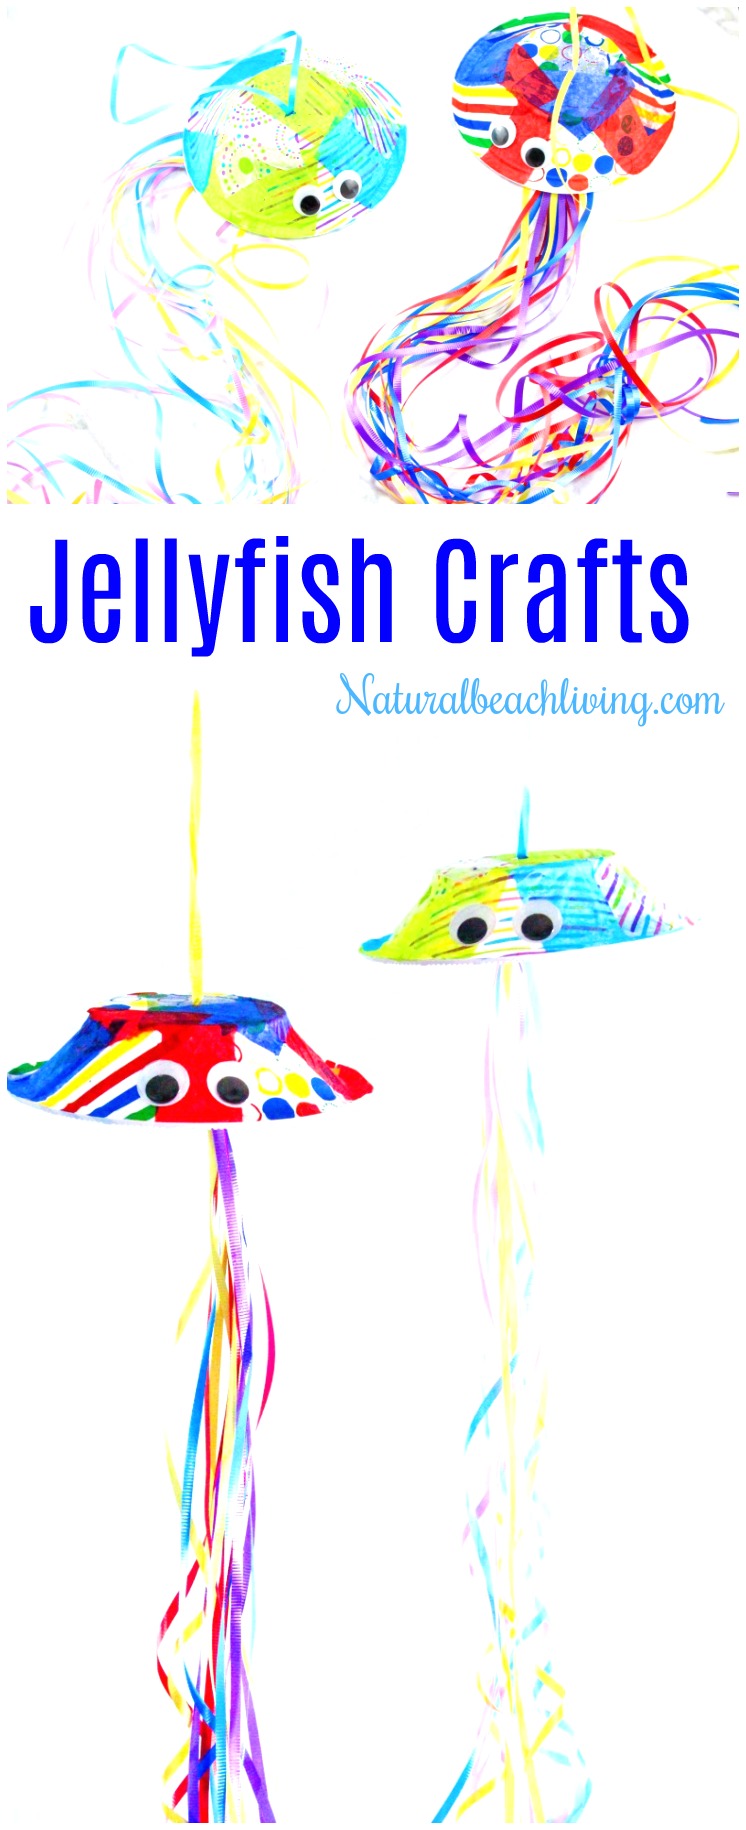 How to Make Adorable Jellyfish Crafts Preschool Activity, Paper Bowl Jellyfish, Perfect Under the Sea Theme or Ocean Unit Study, Ocean Animals Crafts